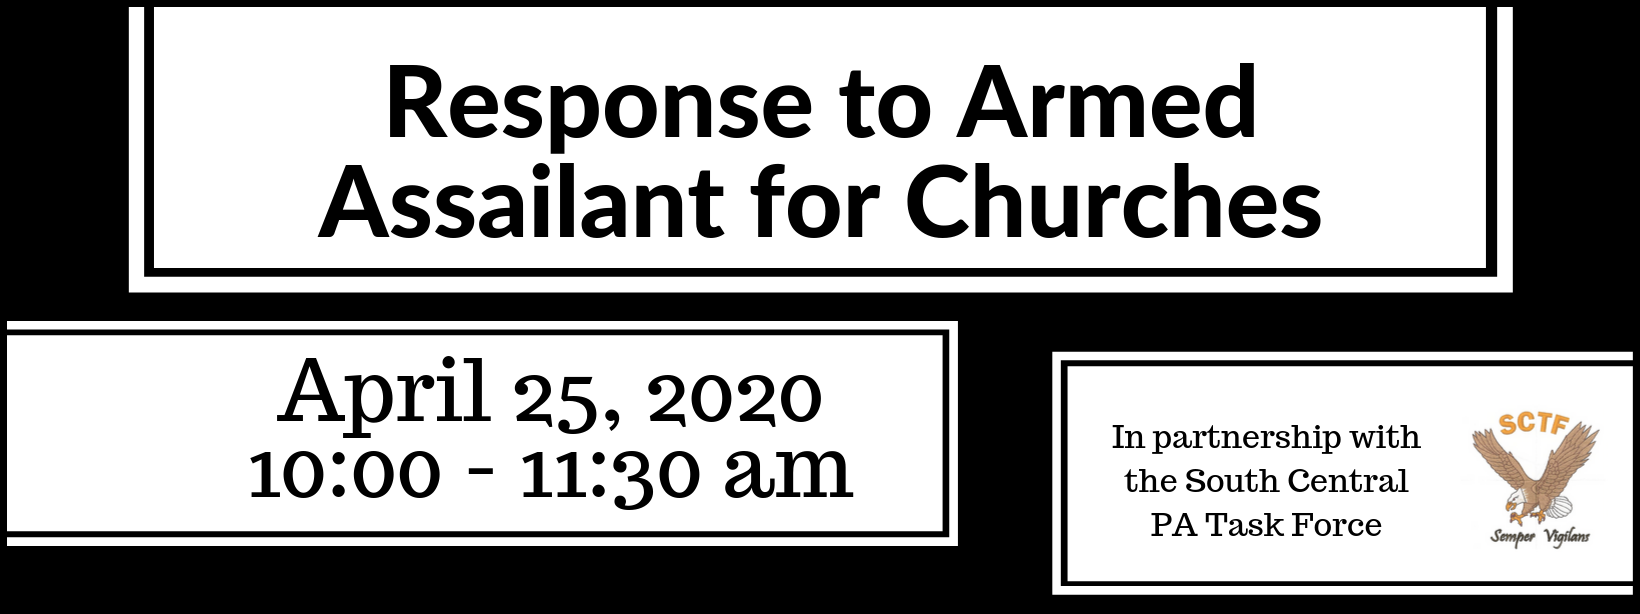 Response to Armed Assailant for Churches